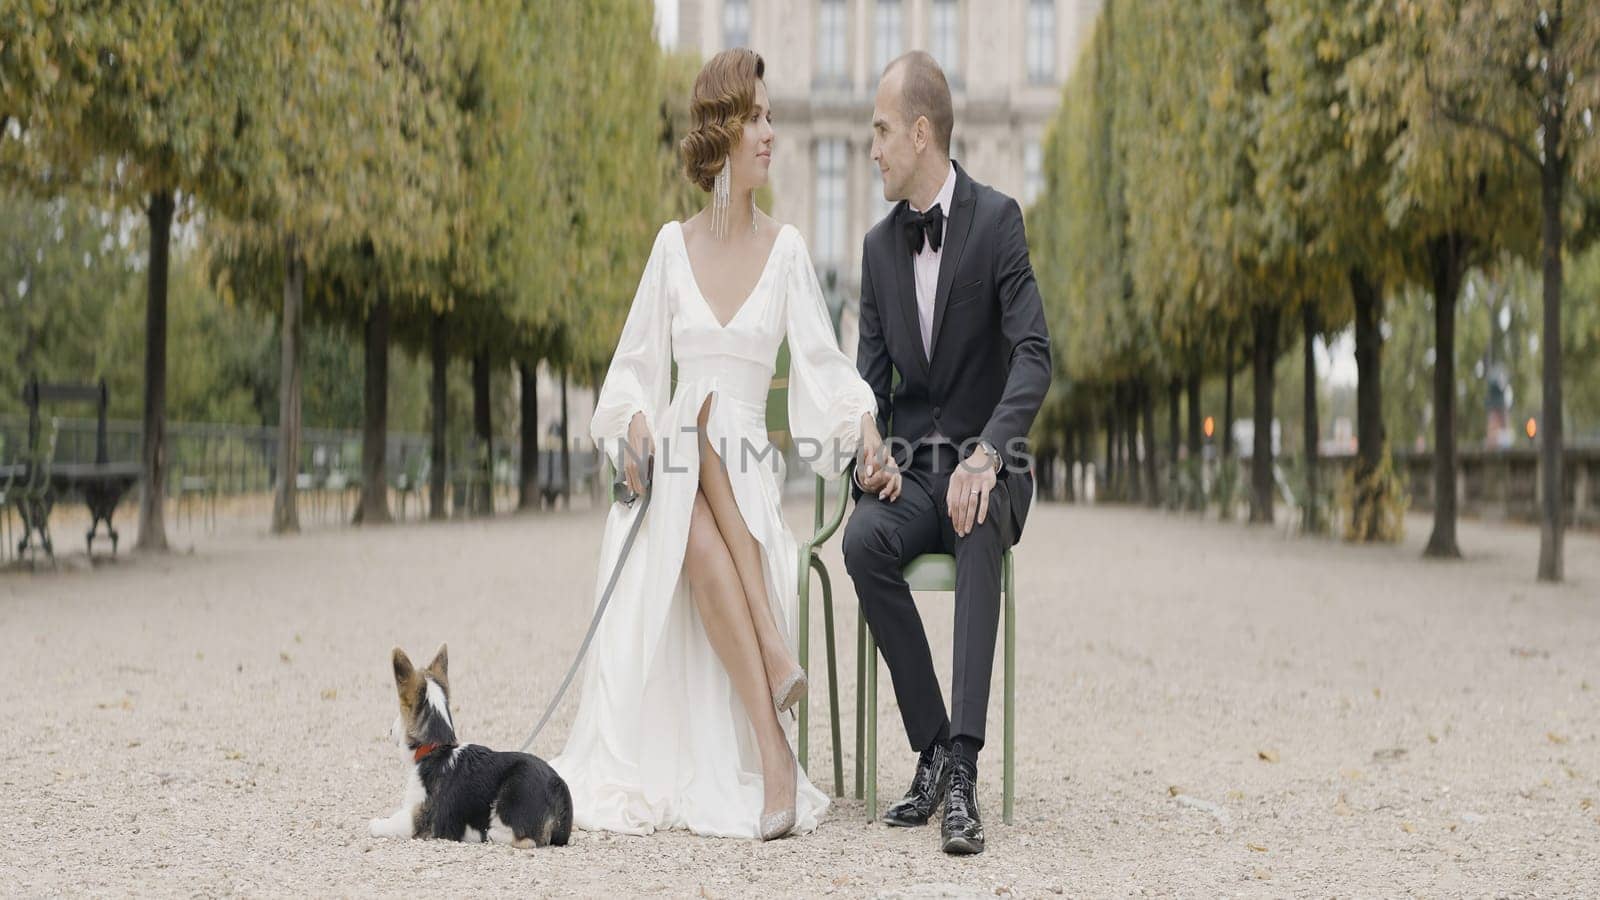 Groom and bride walking with a small dog in park. Action. Funny pet outdoors with his loving owners, man in suit and woman in white dress